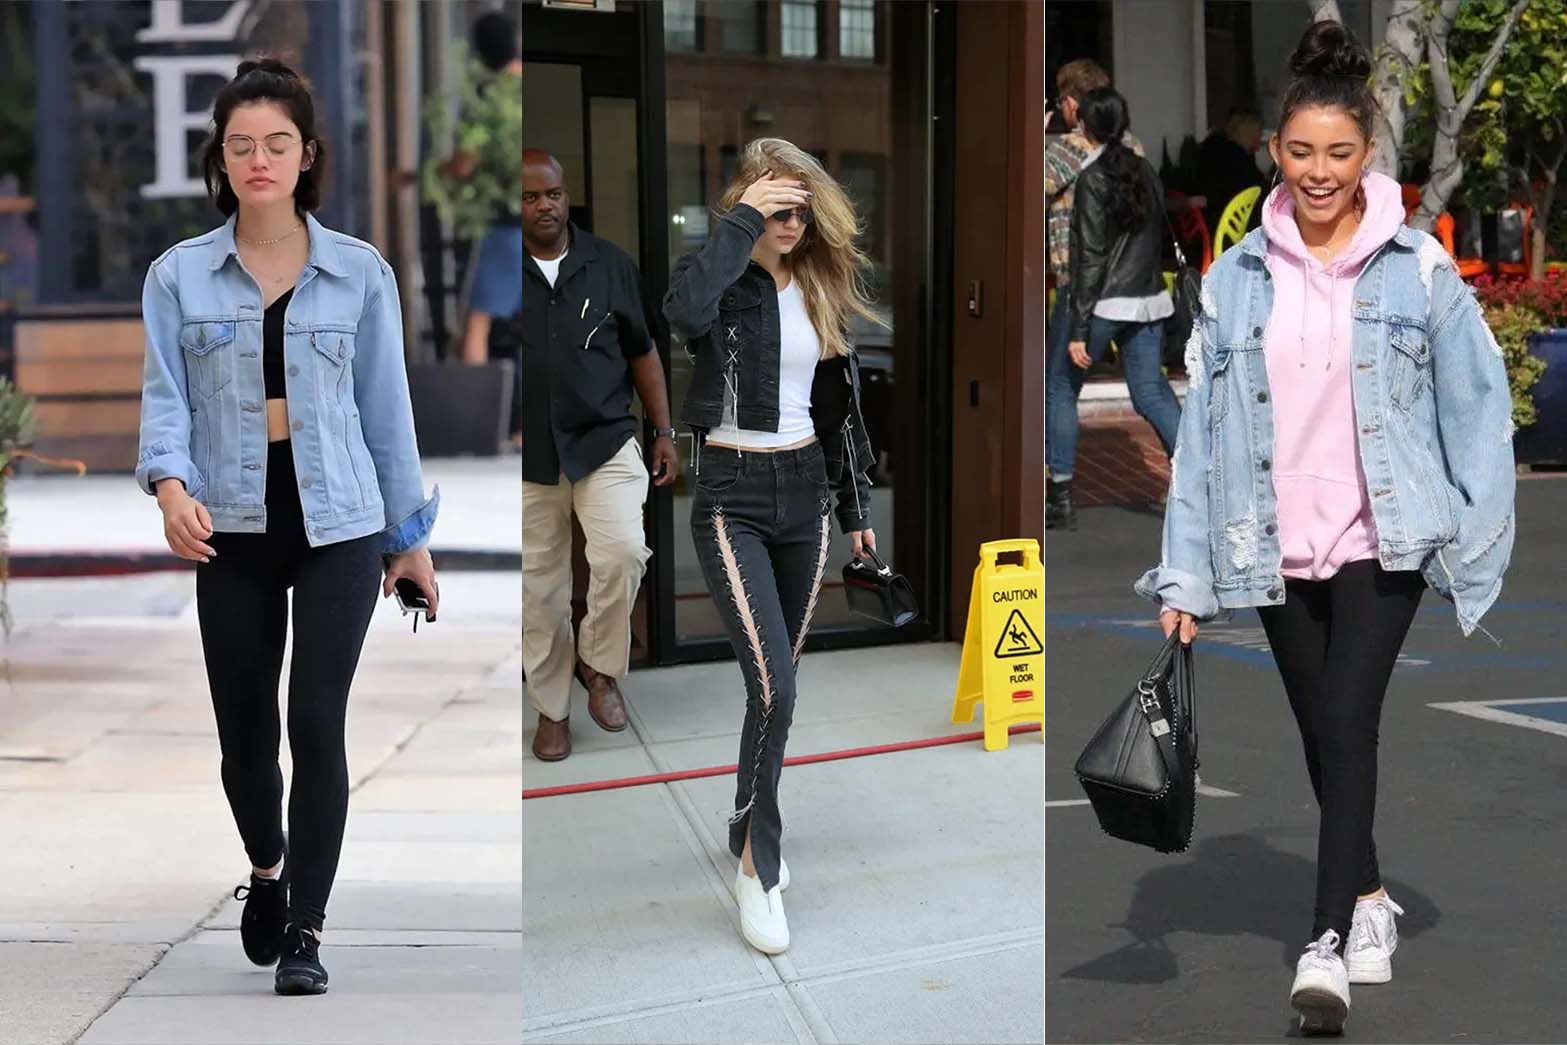 Jean Jacket Outfits: How to Style a Jean Jacket